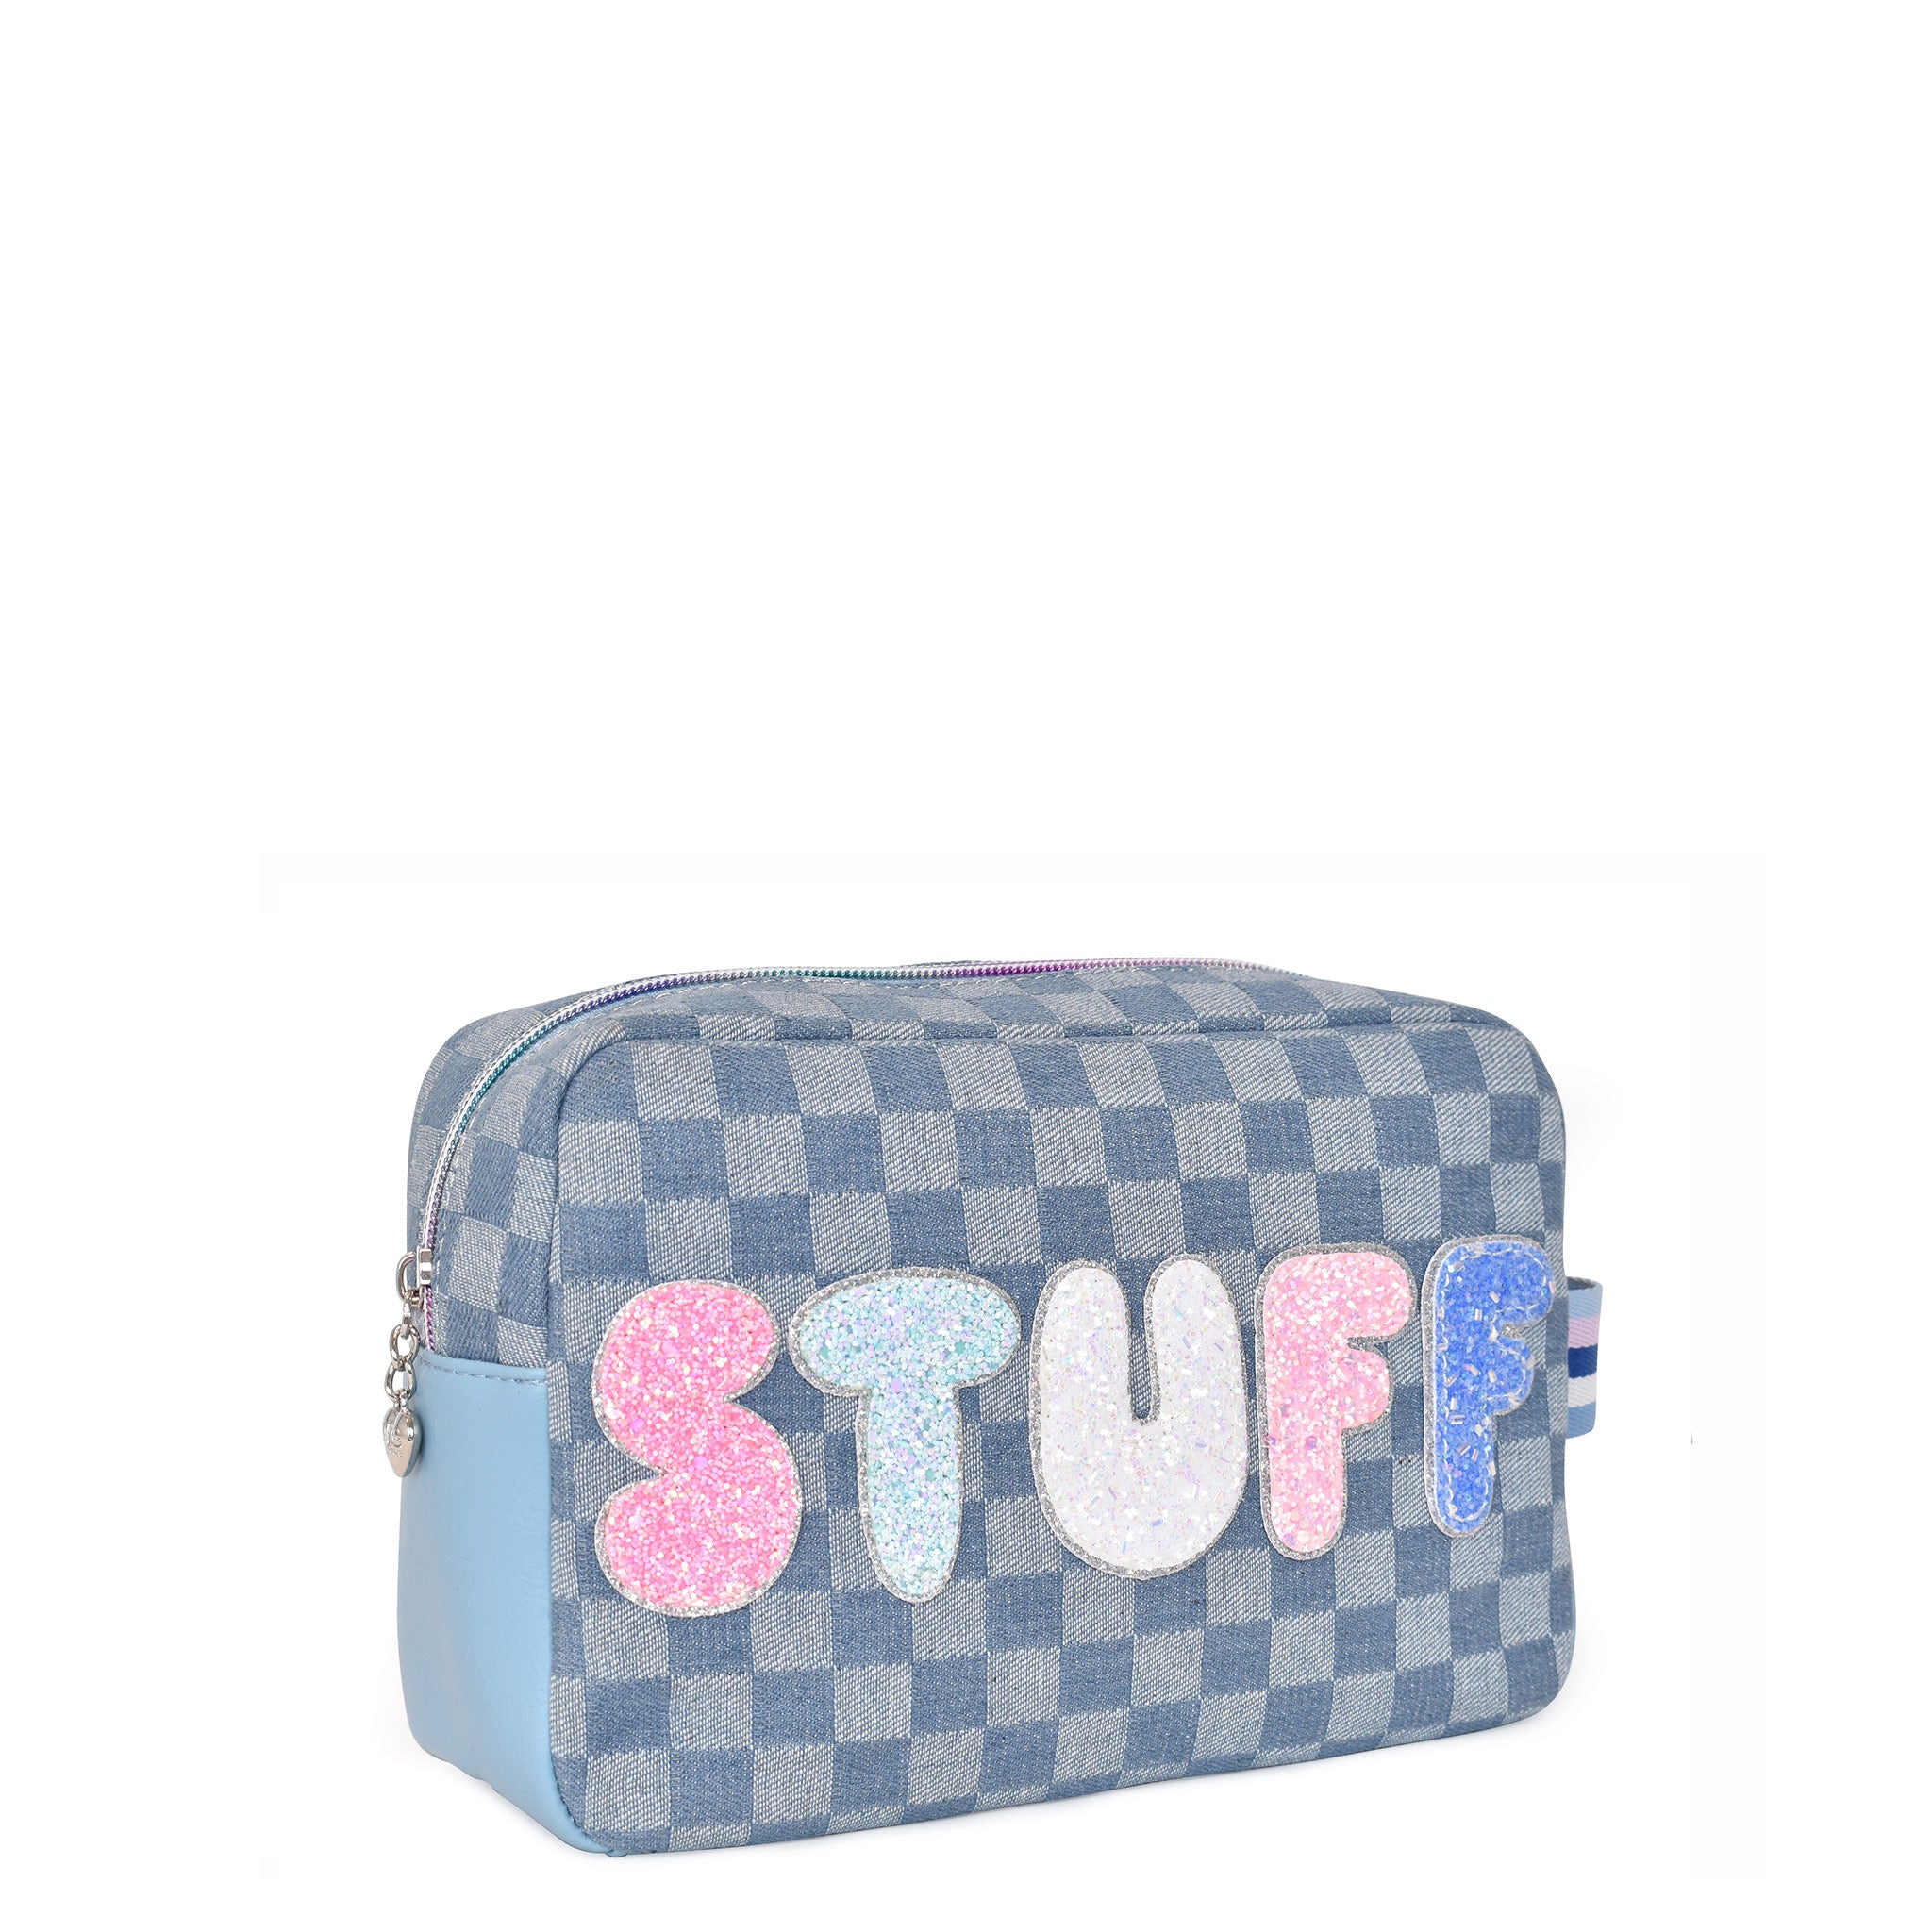 Side view of a denim checkerboard pouch with glitter bubble letters 'STUFF' appliqué